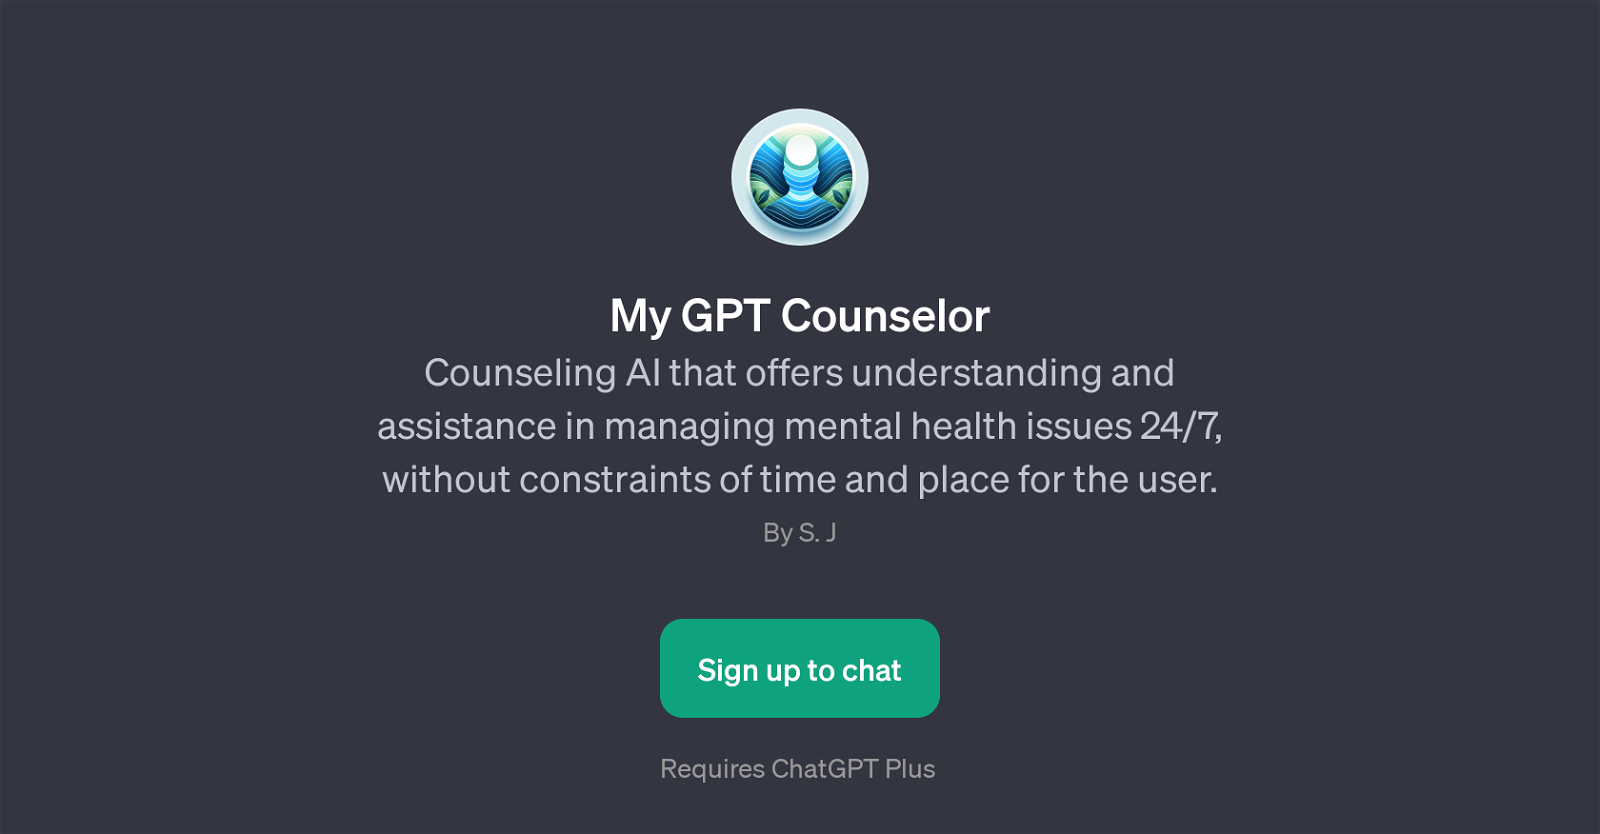 My GPT Counselor website